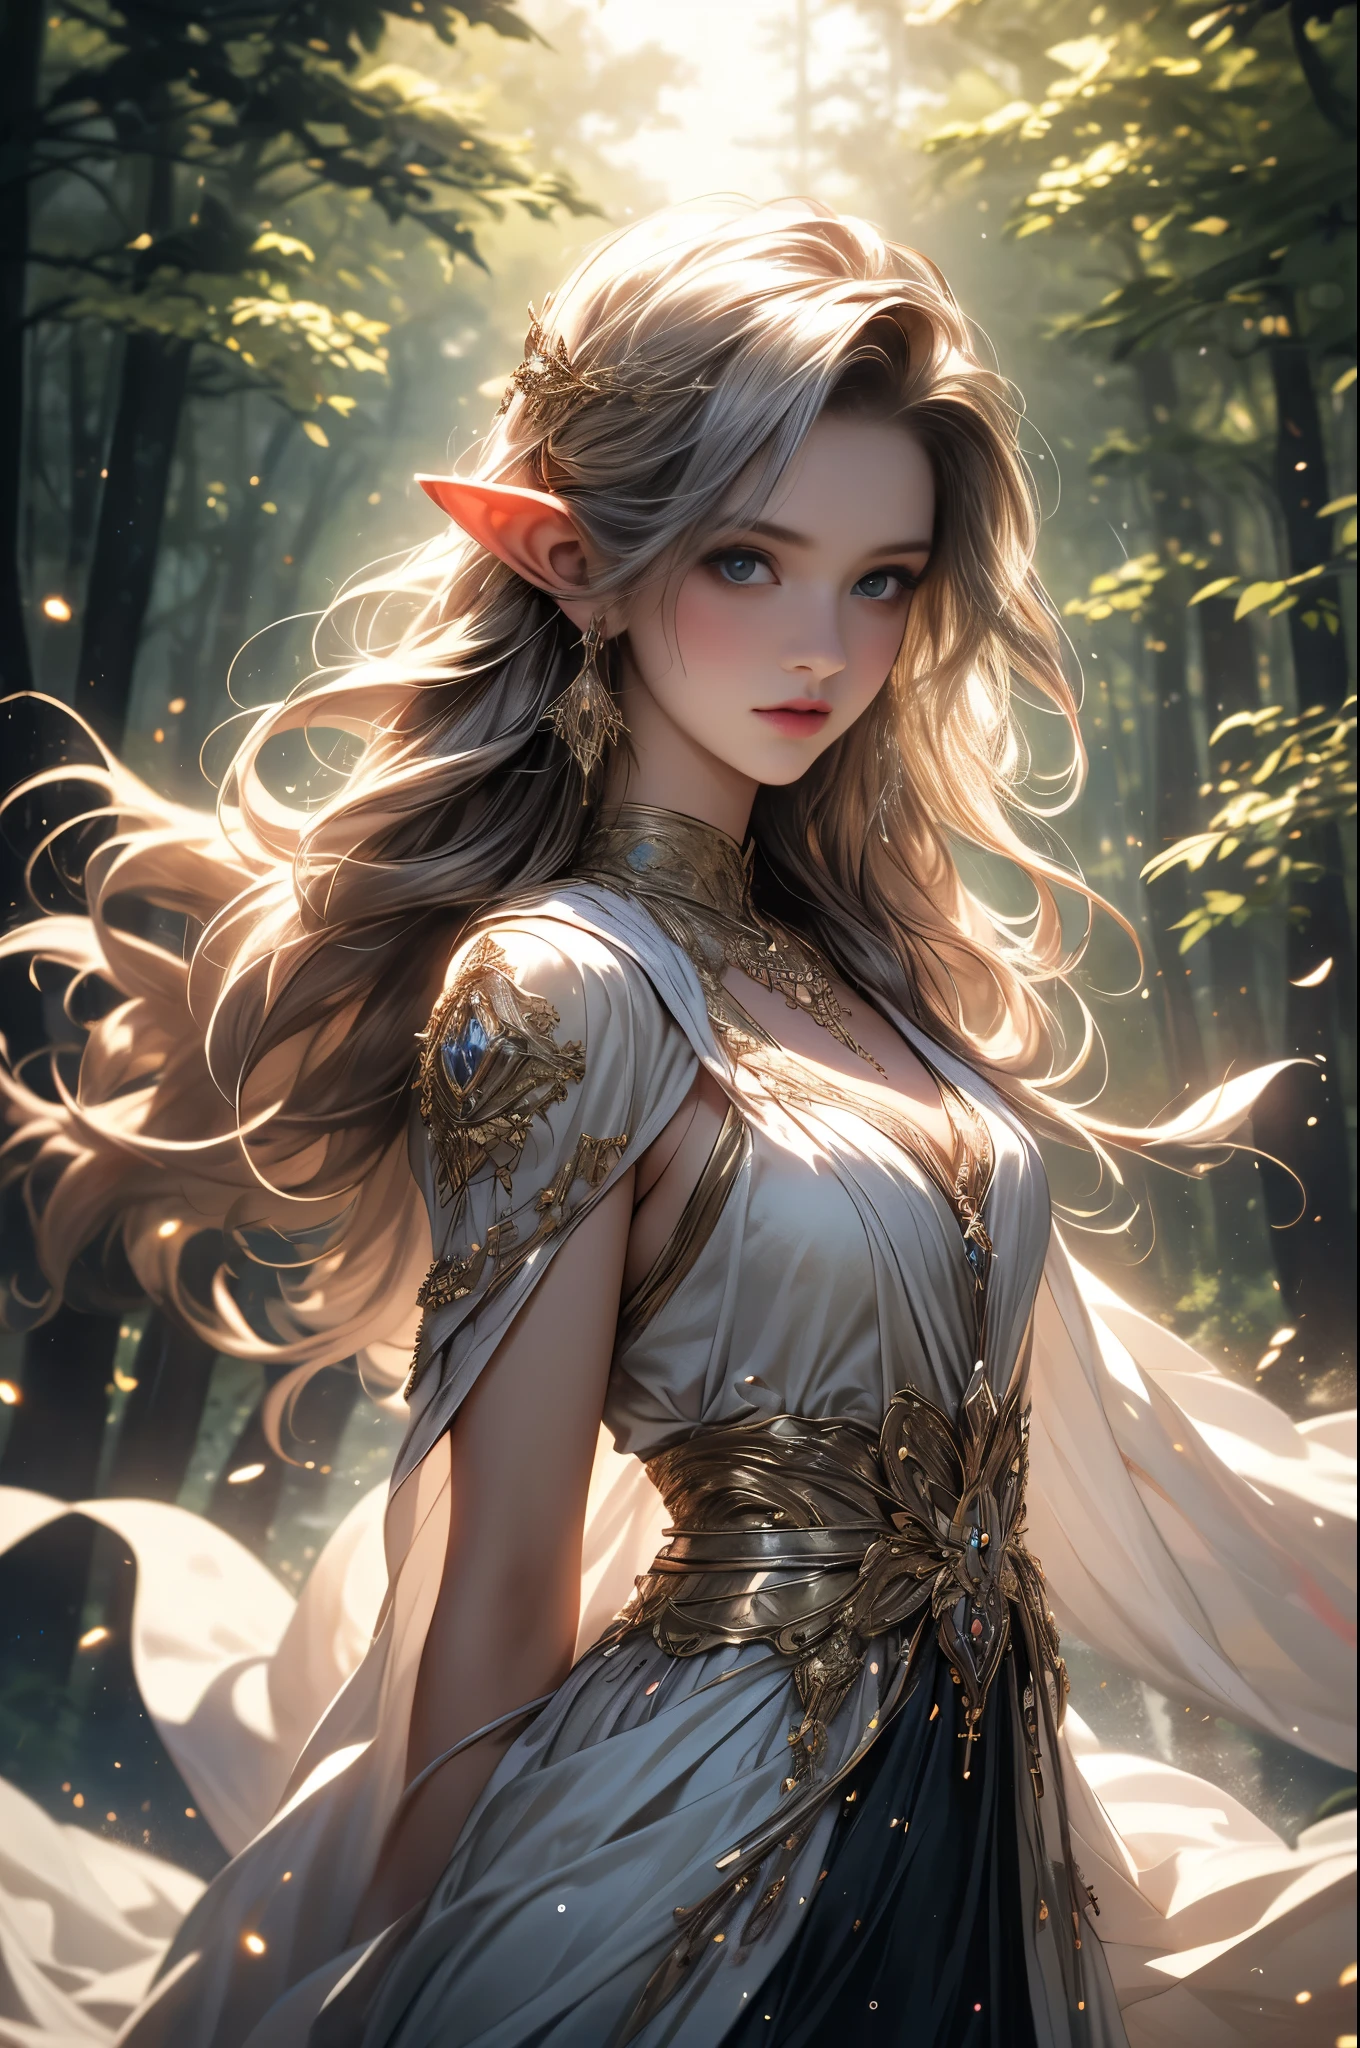 (best quality,4k,8k,highres,masterpiece:1.2), ultra-detailed, (realistic,photorealistic,photo-realistic:1.37), In the heart of an enchanted forest, bathed in the soft glow of moonlight filtering through the canopy above, stands a figure of ethereal beauty. She is an elven enchantress, her long silver hair cascading in shimmering waves around her slender form like strands of moonlight woven into silk. (Her eyes, a mesmerizing blend of iridescent hues, shimmer with an otherworldly light, reflecting the myriad colors of the forest around her:1.5). They are windows to a soul as ancient as the trees themselves, filled with wisdom and mystery far beyond her tender years. Clad in robes of flowing white adorned with intricate patterns of silver thread, she moves with a grace that is both elegant and effortless. Each movement is a dance, a fluid motion that seems to ripple through the air like water flowing over smooth stones. As she raises her delicate hands to the sky, the air around her crackles with magical energy, the very essence of the forest responding to her call. Words of power spill from her lips like liquid silver, ancient incantations that echo through the stillness of the night with a haunting melody. With each word, tendrils of magical energy begin to swirl around her, weaving together in a shimmering vortex of light and shadow. Shapes begin to form within the swirling maelstrom, phantom creatures born of pure magic dancing to the rhythm of her voice. And as she reaches the climax of her incantation, her voice rises to a crescendo, filling the forest with a symphony of power and wonder. With a final flourish of her hands, she releases the spell, the magical energies coalescing into a radiant burst of light that illuminates the darkness like a thousand stars.(art by Amano Yoshitaka:1.3)